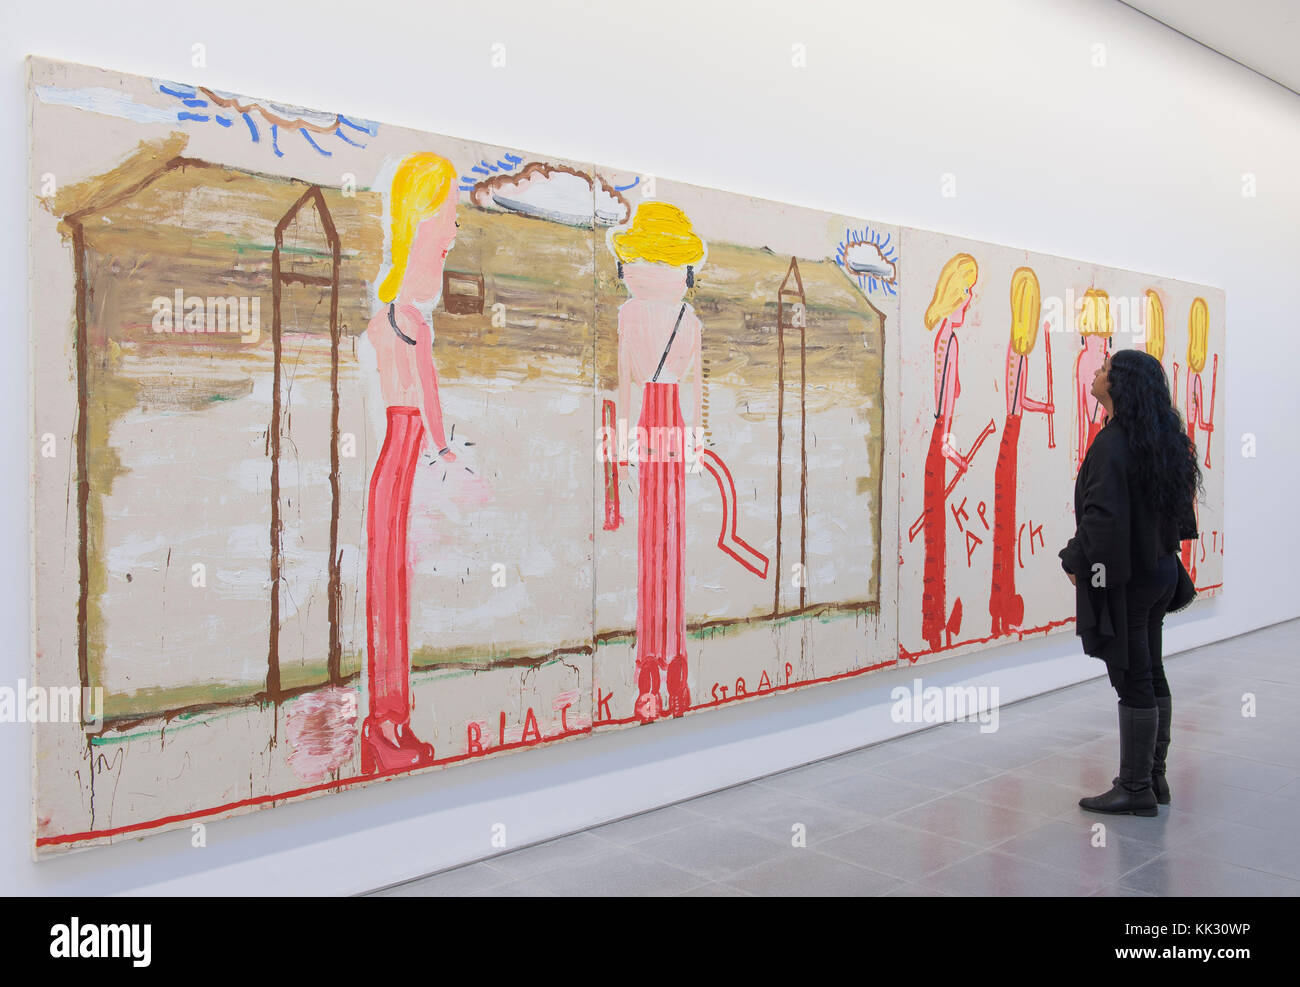 Serpentine Galleries, London, UK. 29 November, 2017. In her first major institutional/London show, British artist Rose Wylie presents her vibrant, large-scale, figurative paintings that depict a range of subjects, from the parkland of Kensington Gardens and an Arsenal vs Spurs match to Quentin Tarantino’s Kill Bill films and celebrity culture, including Elizabeth Taylor, Penelope Cruz and Nicole Kidman. Photo: Black Strap (Eyelashes) 2014; NK (Syracuse Line-up) 2014. Private Collection. Posed with gallery staff. Credit: Malcolm Park/Alamy Live News. Stock Photo